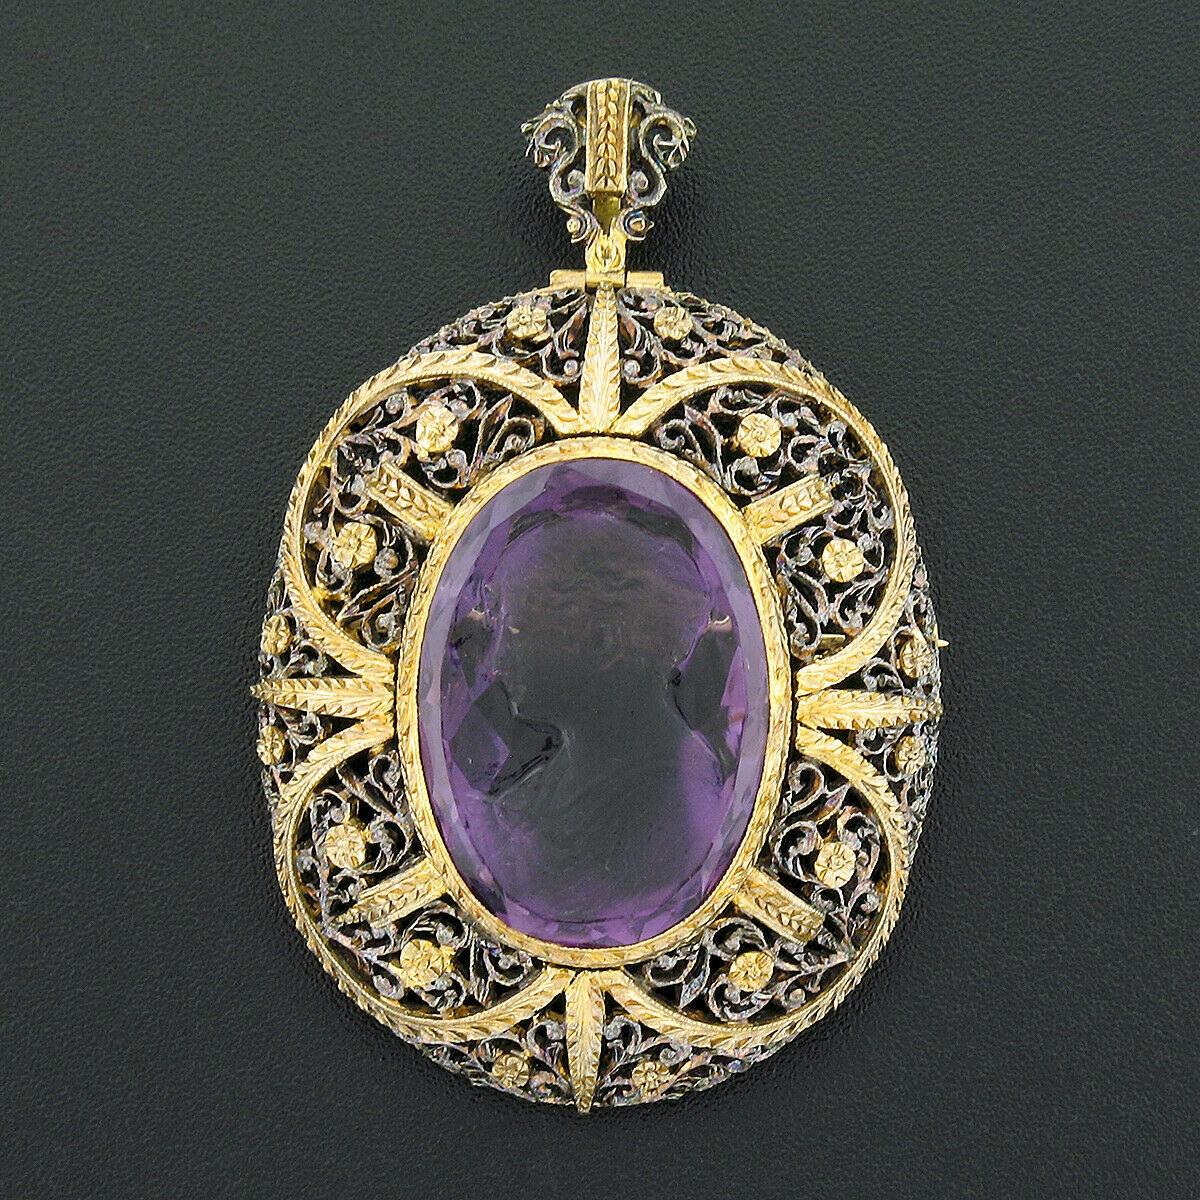 You are looking at an incredible antique pin/brooch pendant that was crafted in Italy from solid 14k yellow gold and designed by Giovanni Apa. It features a beautiful, hand carved, oval amethyst cameo that is neatly bezel set at the center of a